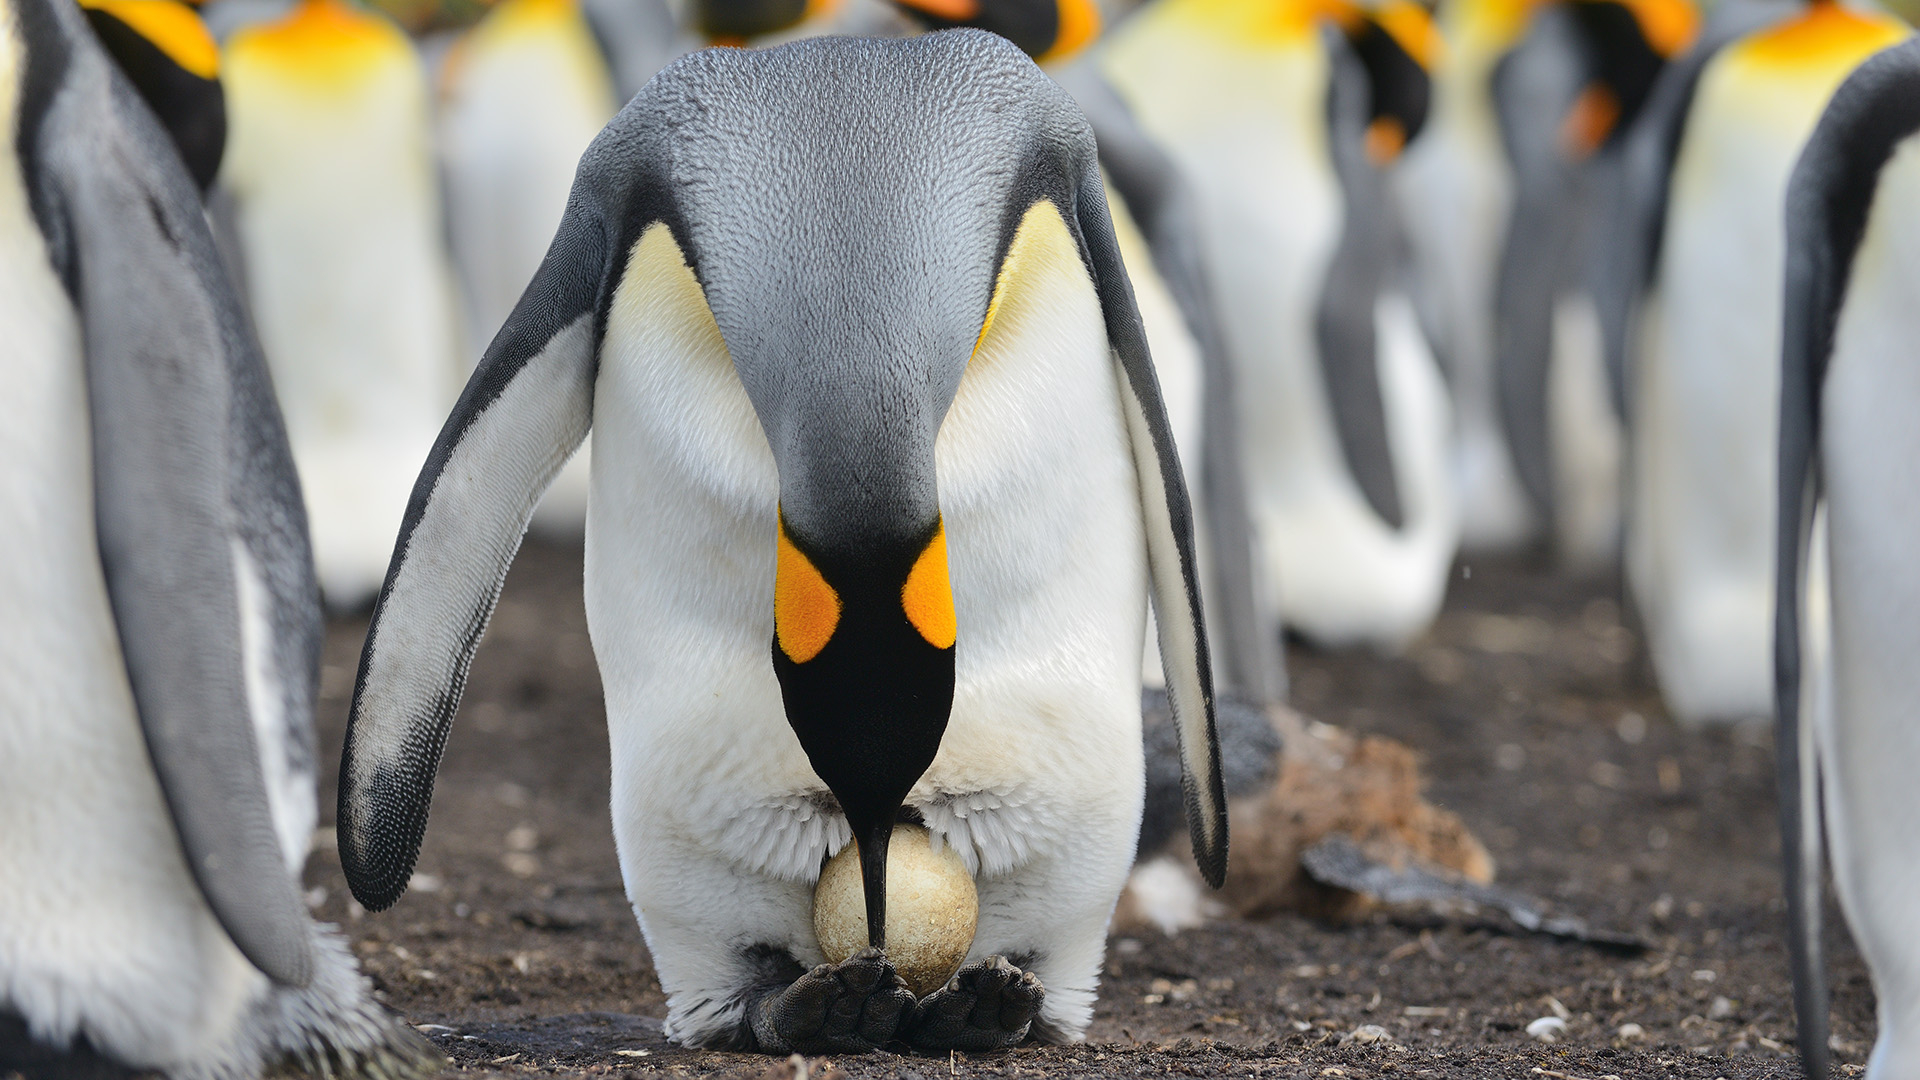 A woman King Penguin taking care of its egg in its abdomen